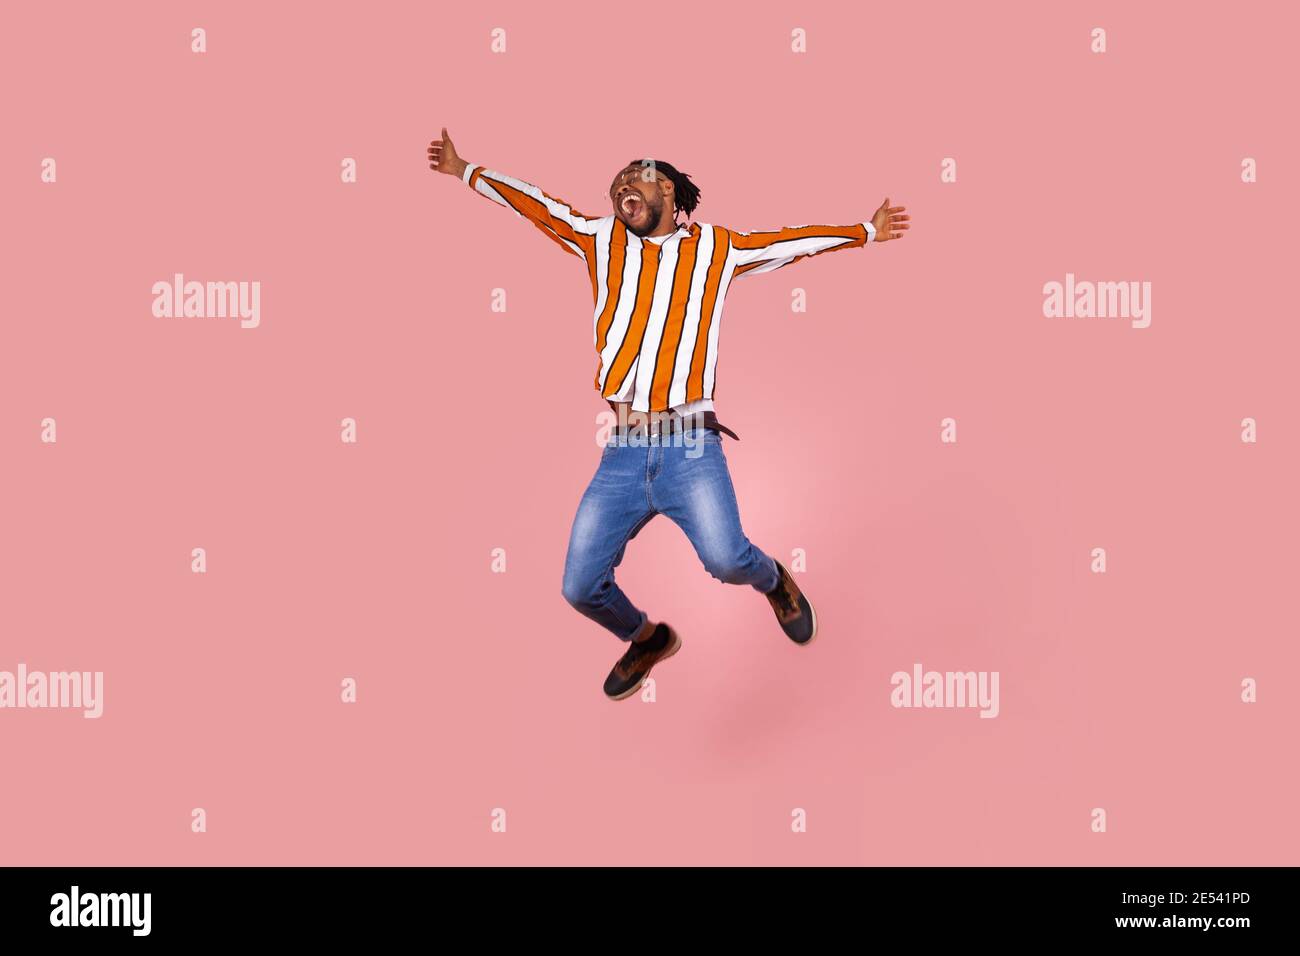 Extremely happy excited afro-american man with dreadlocks in striped shirt highly jumping widely opening hands and screaming feeling freedom. Indoor s Stock Photo